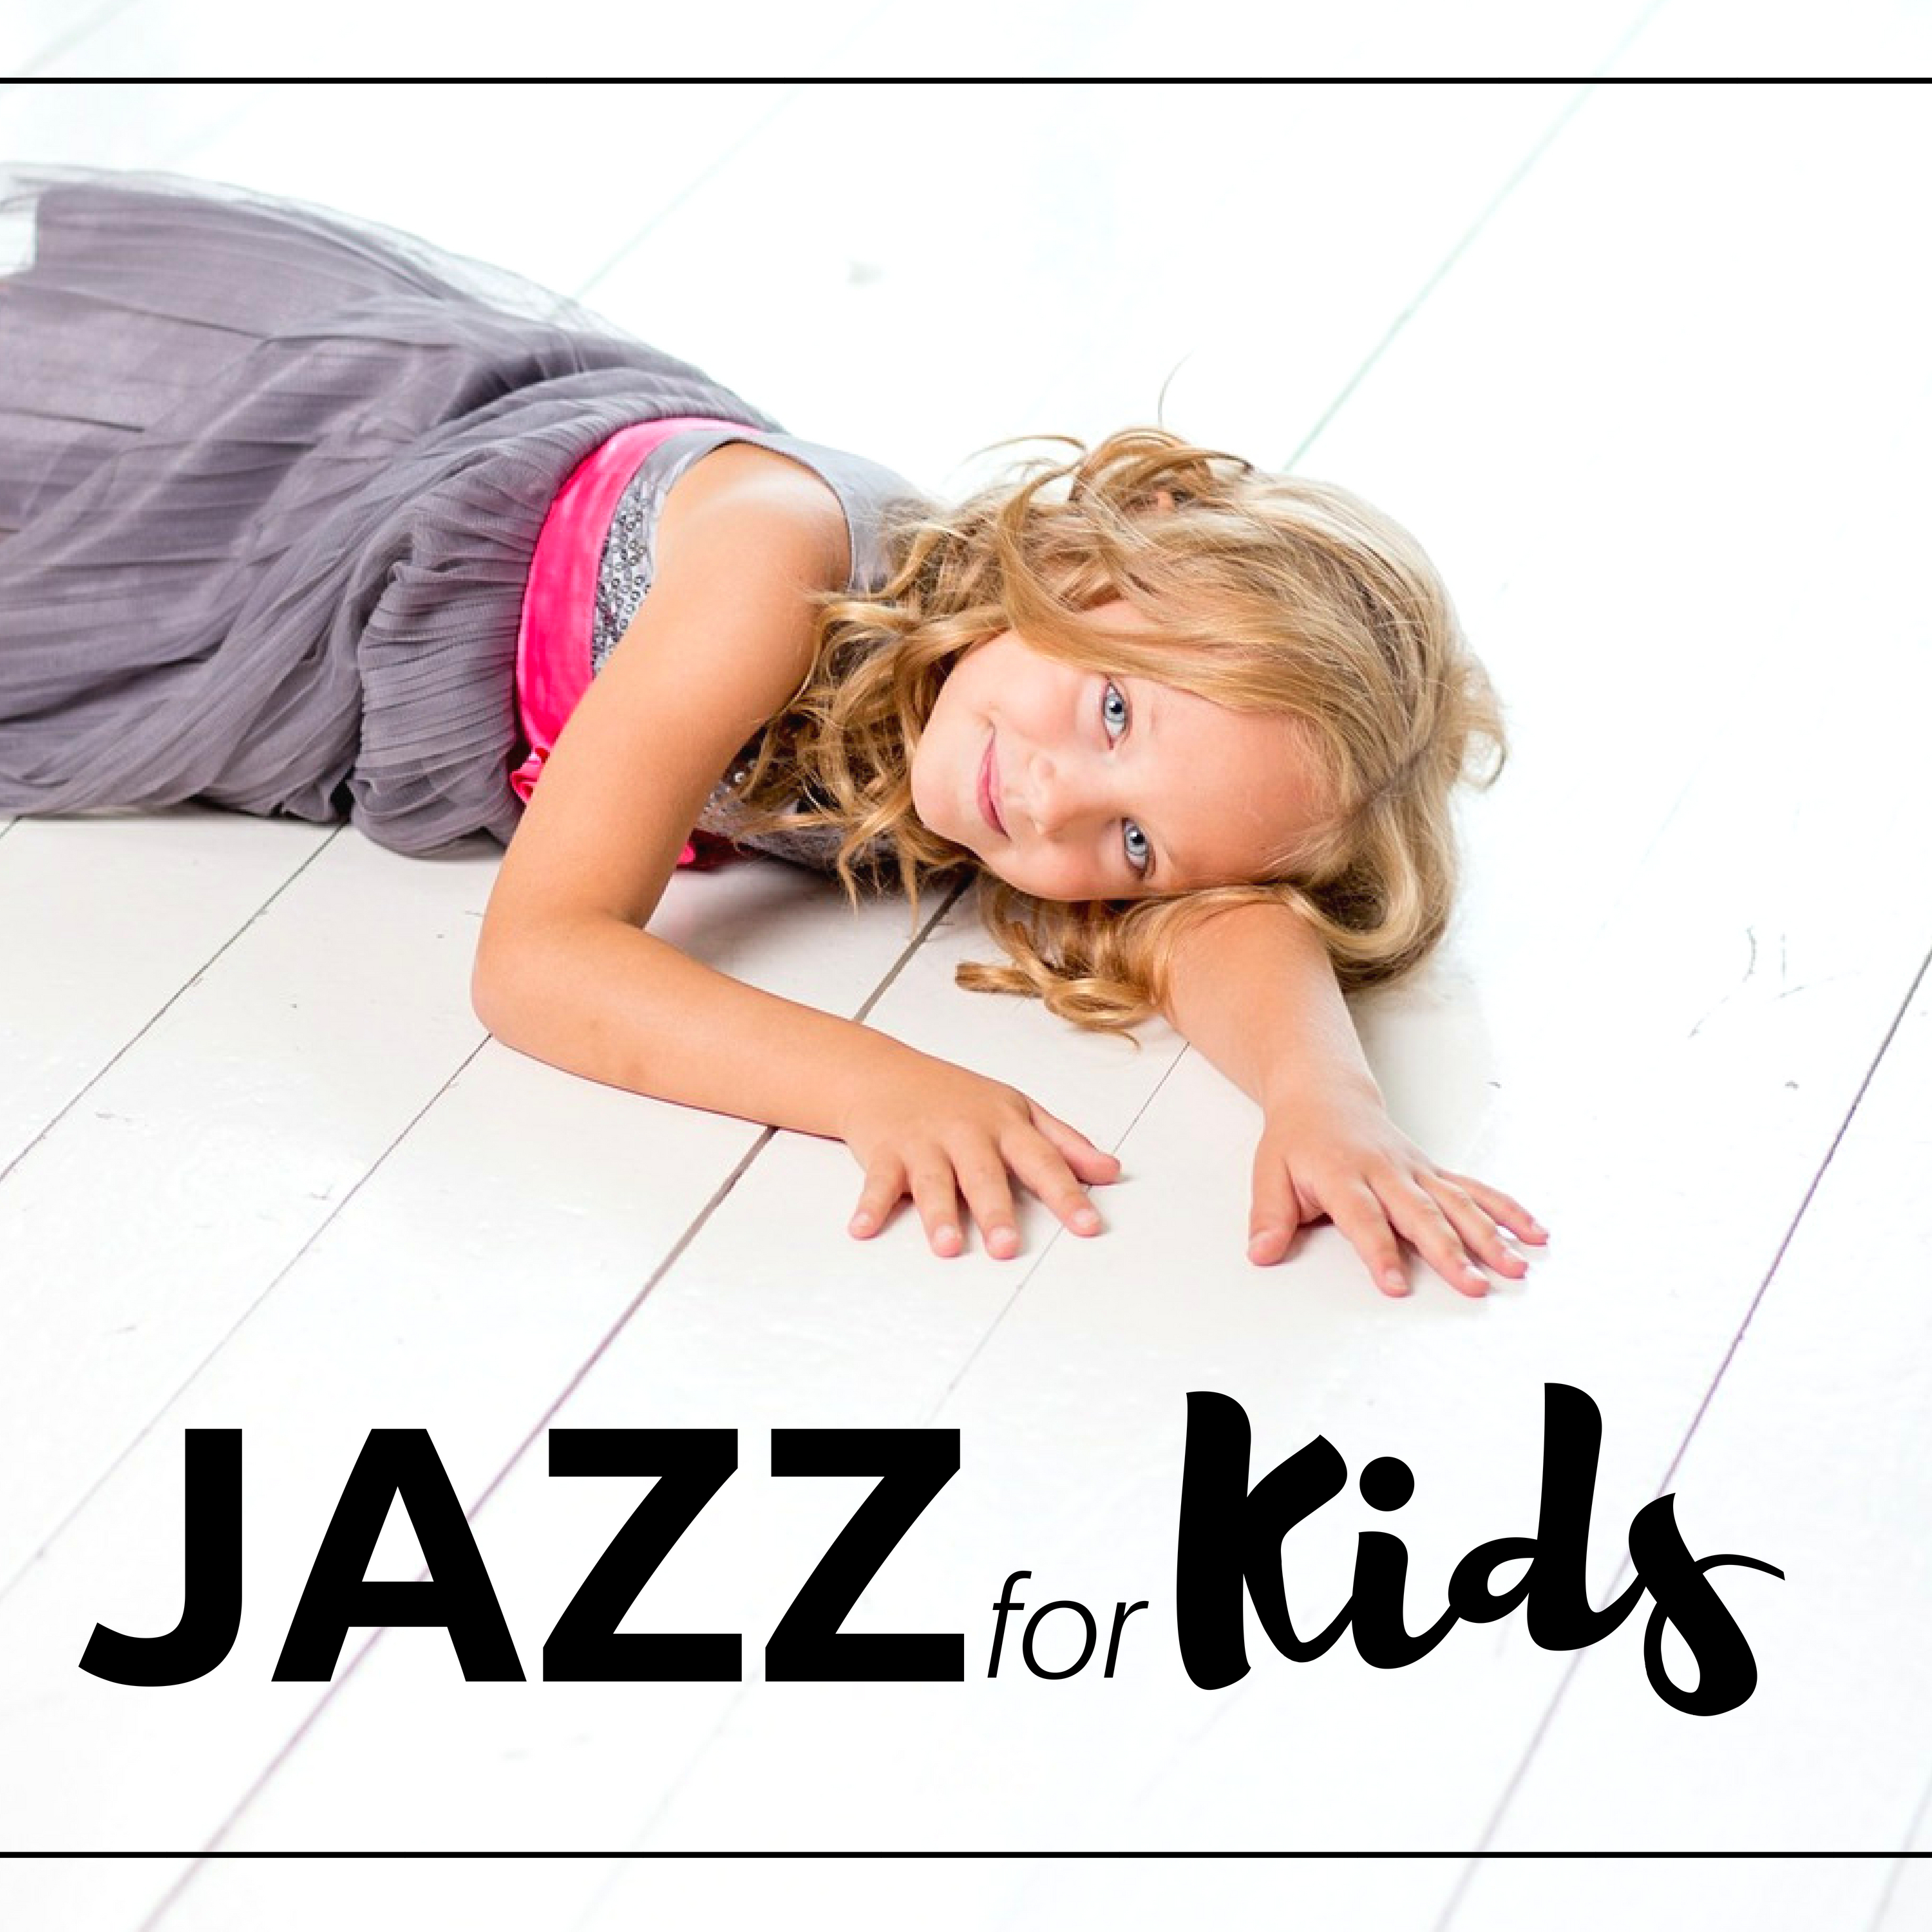 Jazz for Kids: Super Smooth Laid Back Lounge Jazz Tracks for Deep Calm and Relaxation